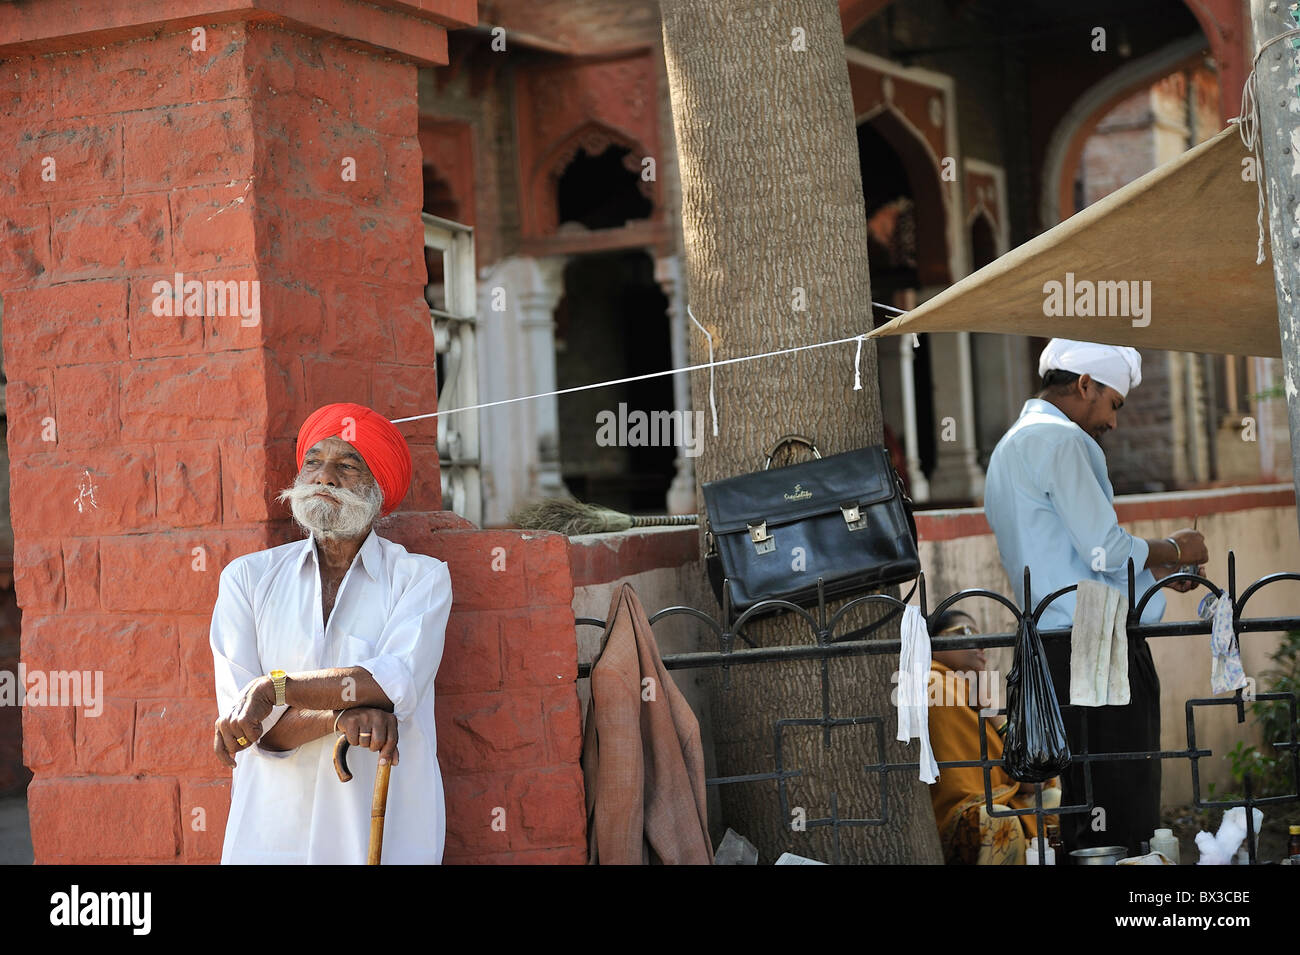 A rajput man wait proudly for the bus in Ajmer, Rajasthan Stock Photo